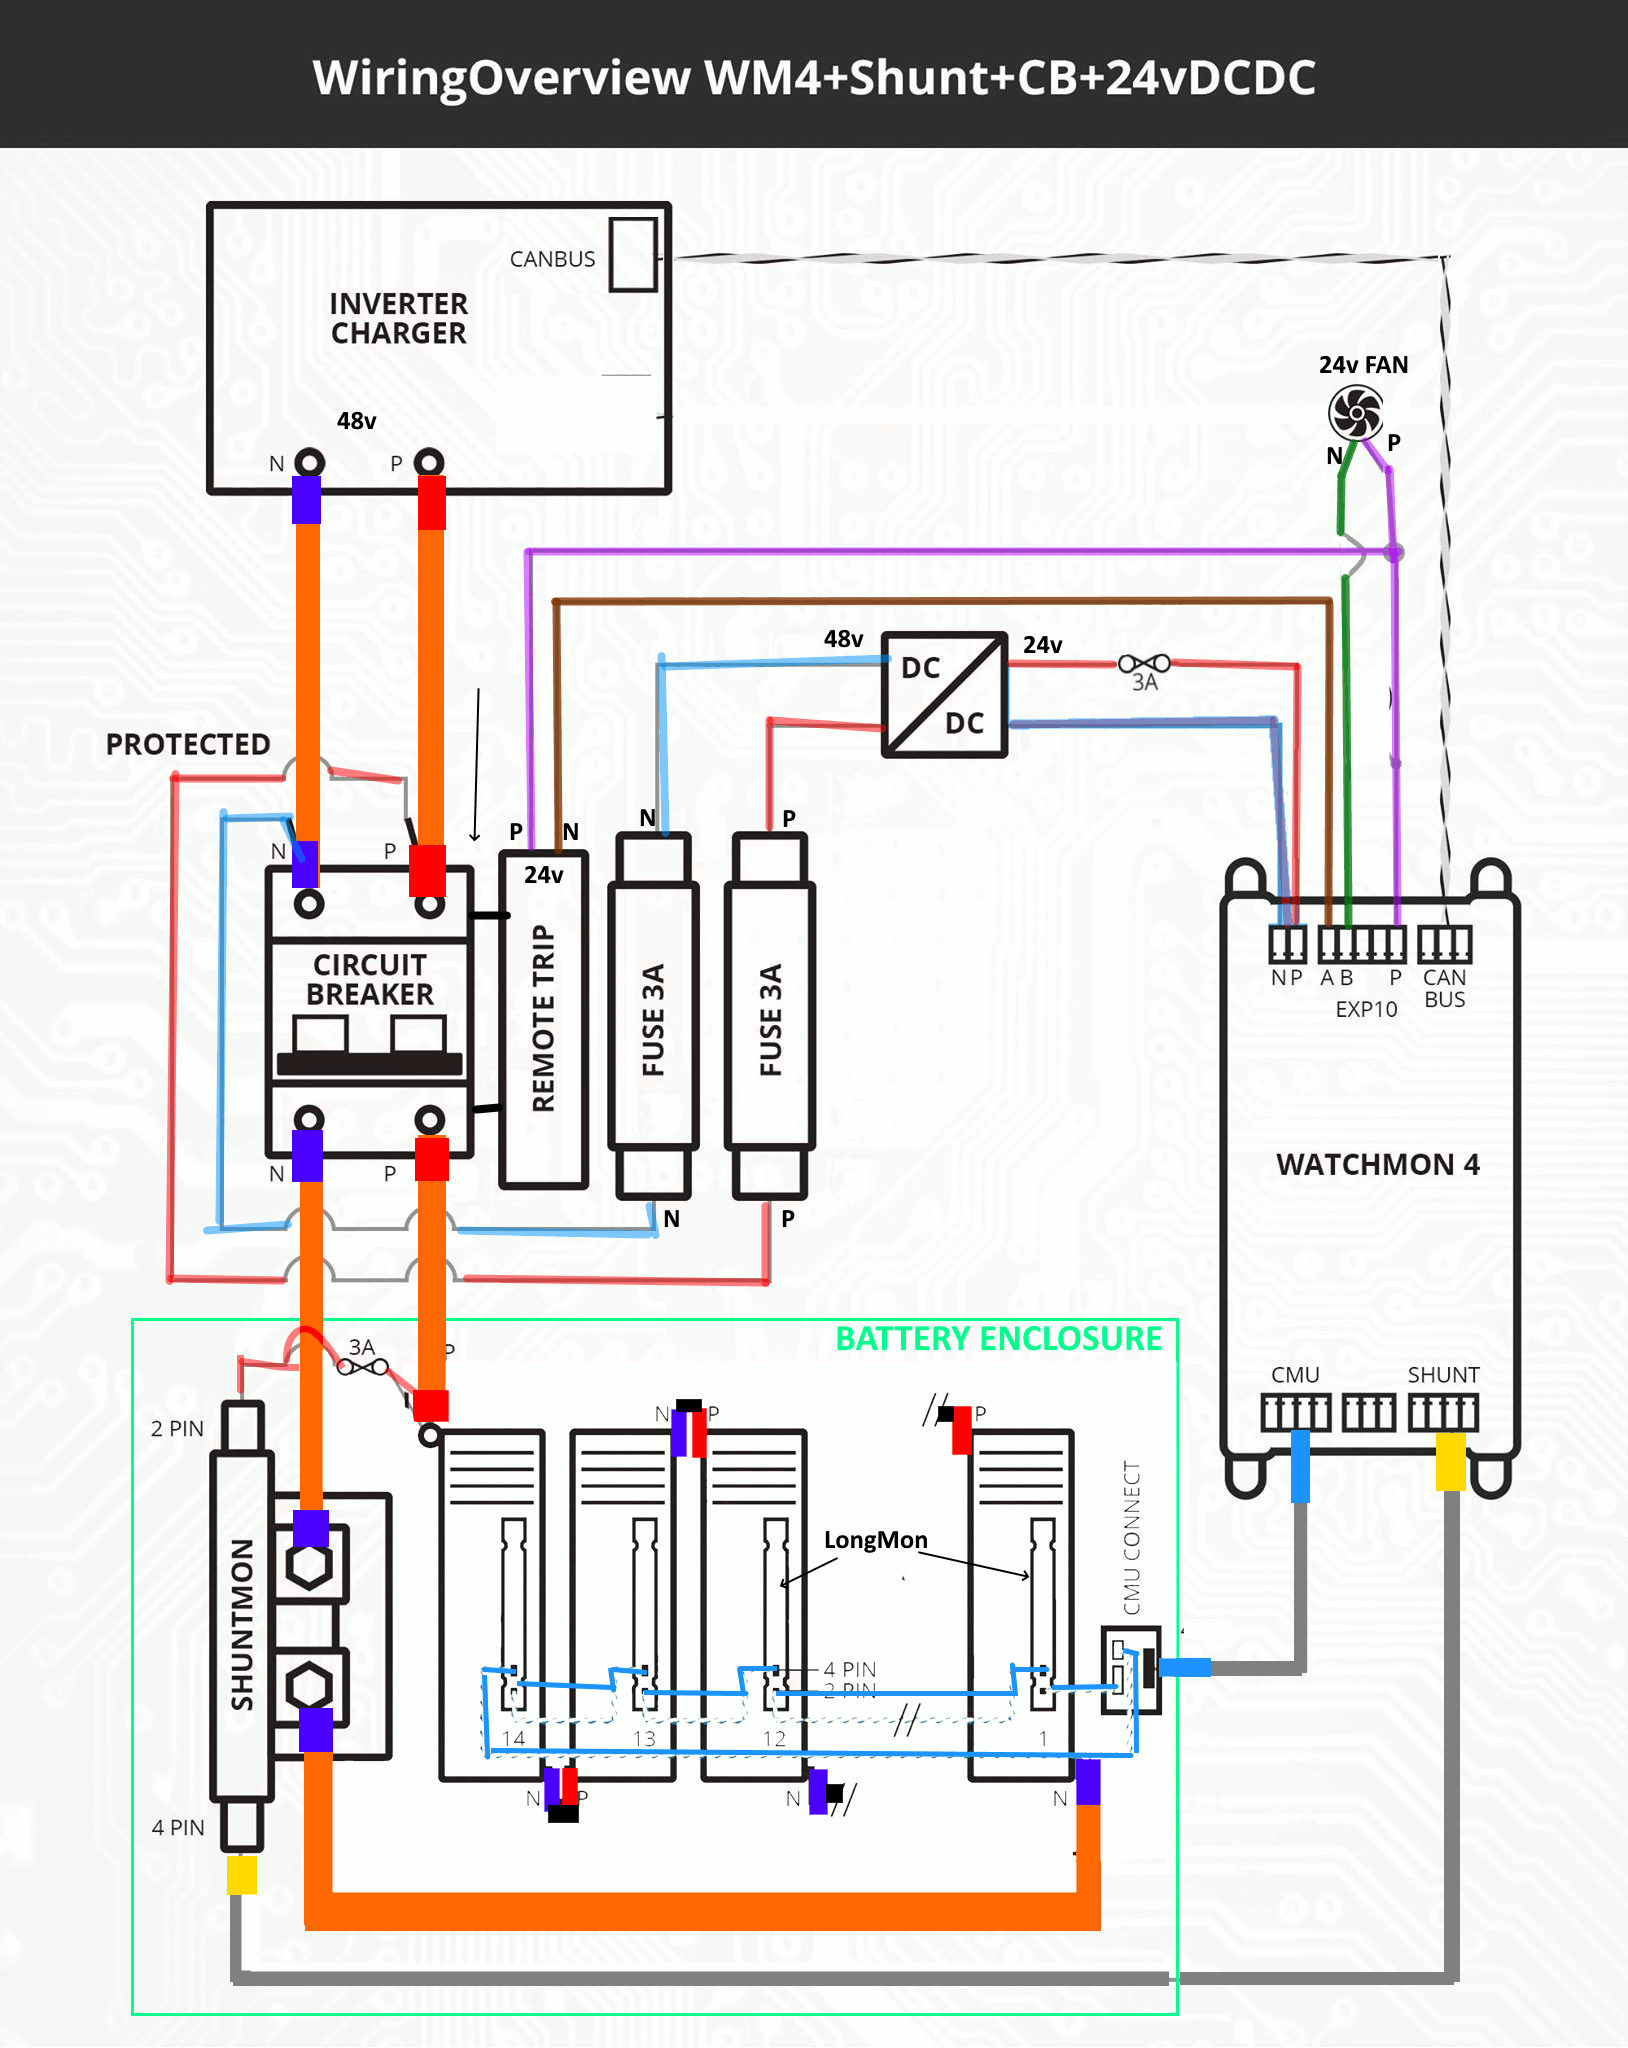 wiring-watchmon4-overview.gif